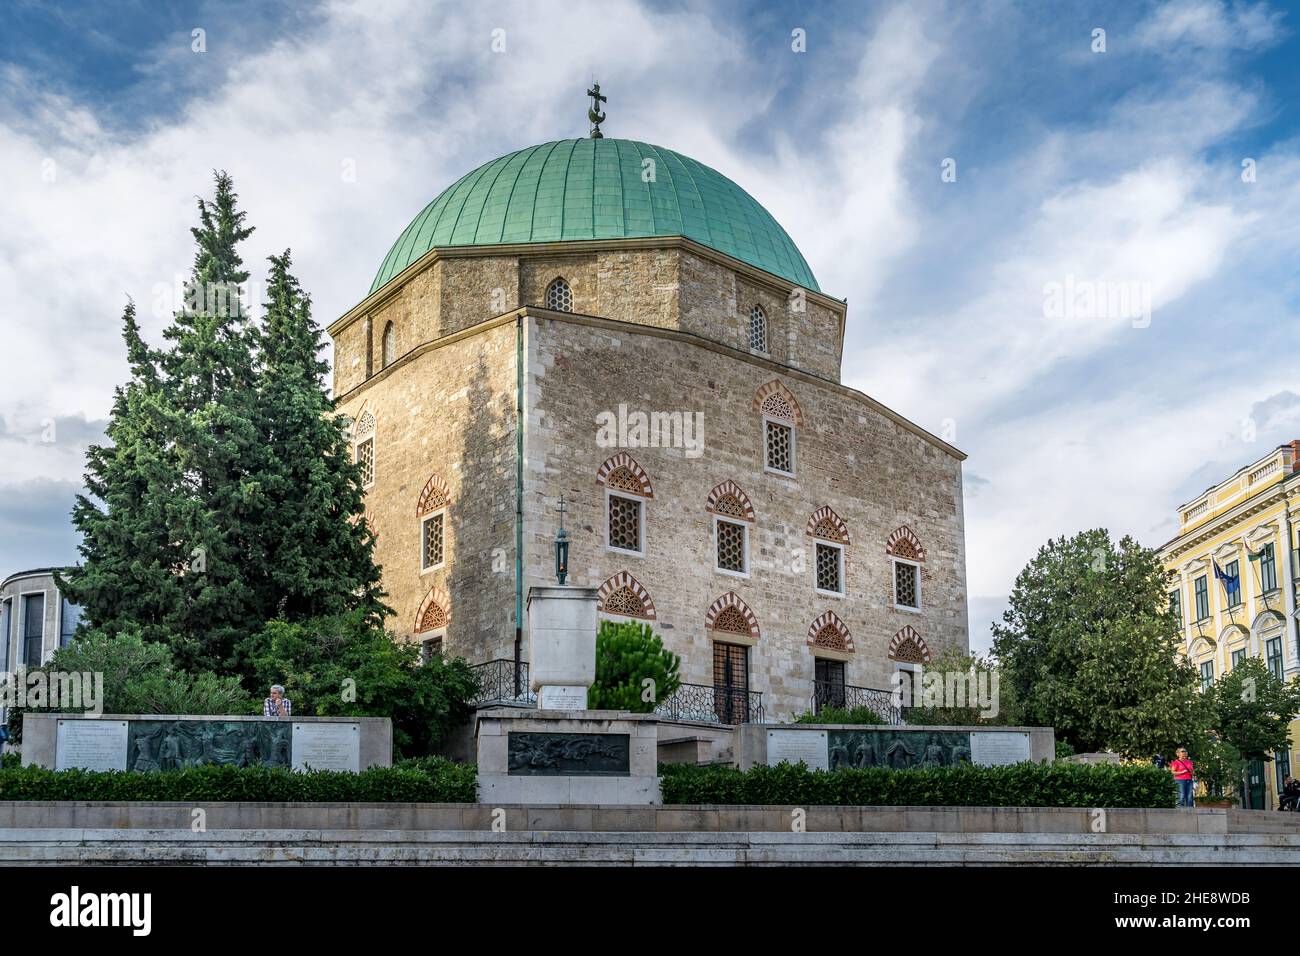 View of the Mosque of Pasha Qasim that now serves as a Catolic church in the trendy university town of Pecs in Southern Hungary Stock Photo